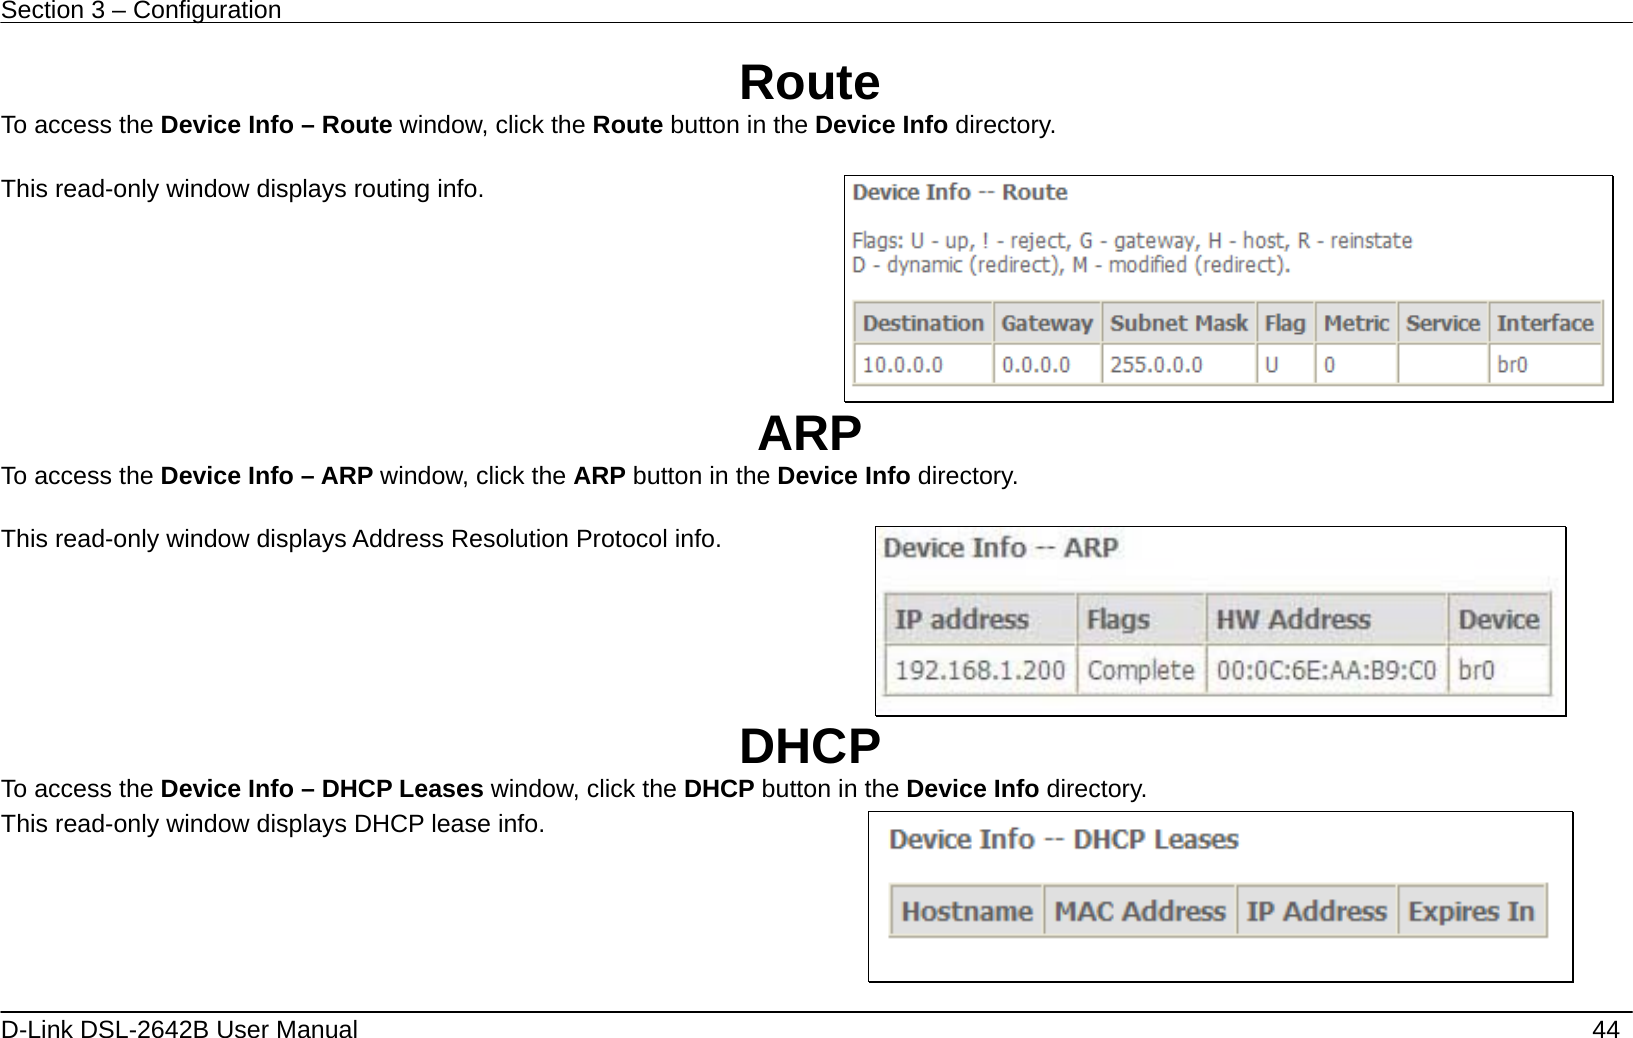 Section 3 – Configuration   D-Link DSL-2642B User Manual    44 Route To access the Device Info – Route window, click the Route button in the Device Info directory.  This read-only window displays routing info.     ARP To access the Device Info – ARP window, click the ARP button in the Device Info directory.  This read-only window displays Address Resolution Protocol info.   DHCP To access the Device Info – DHCP Leases window, click the DHCP button in the Device Info directory. This read-only window displays DHCP lease info.    